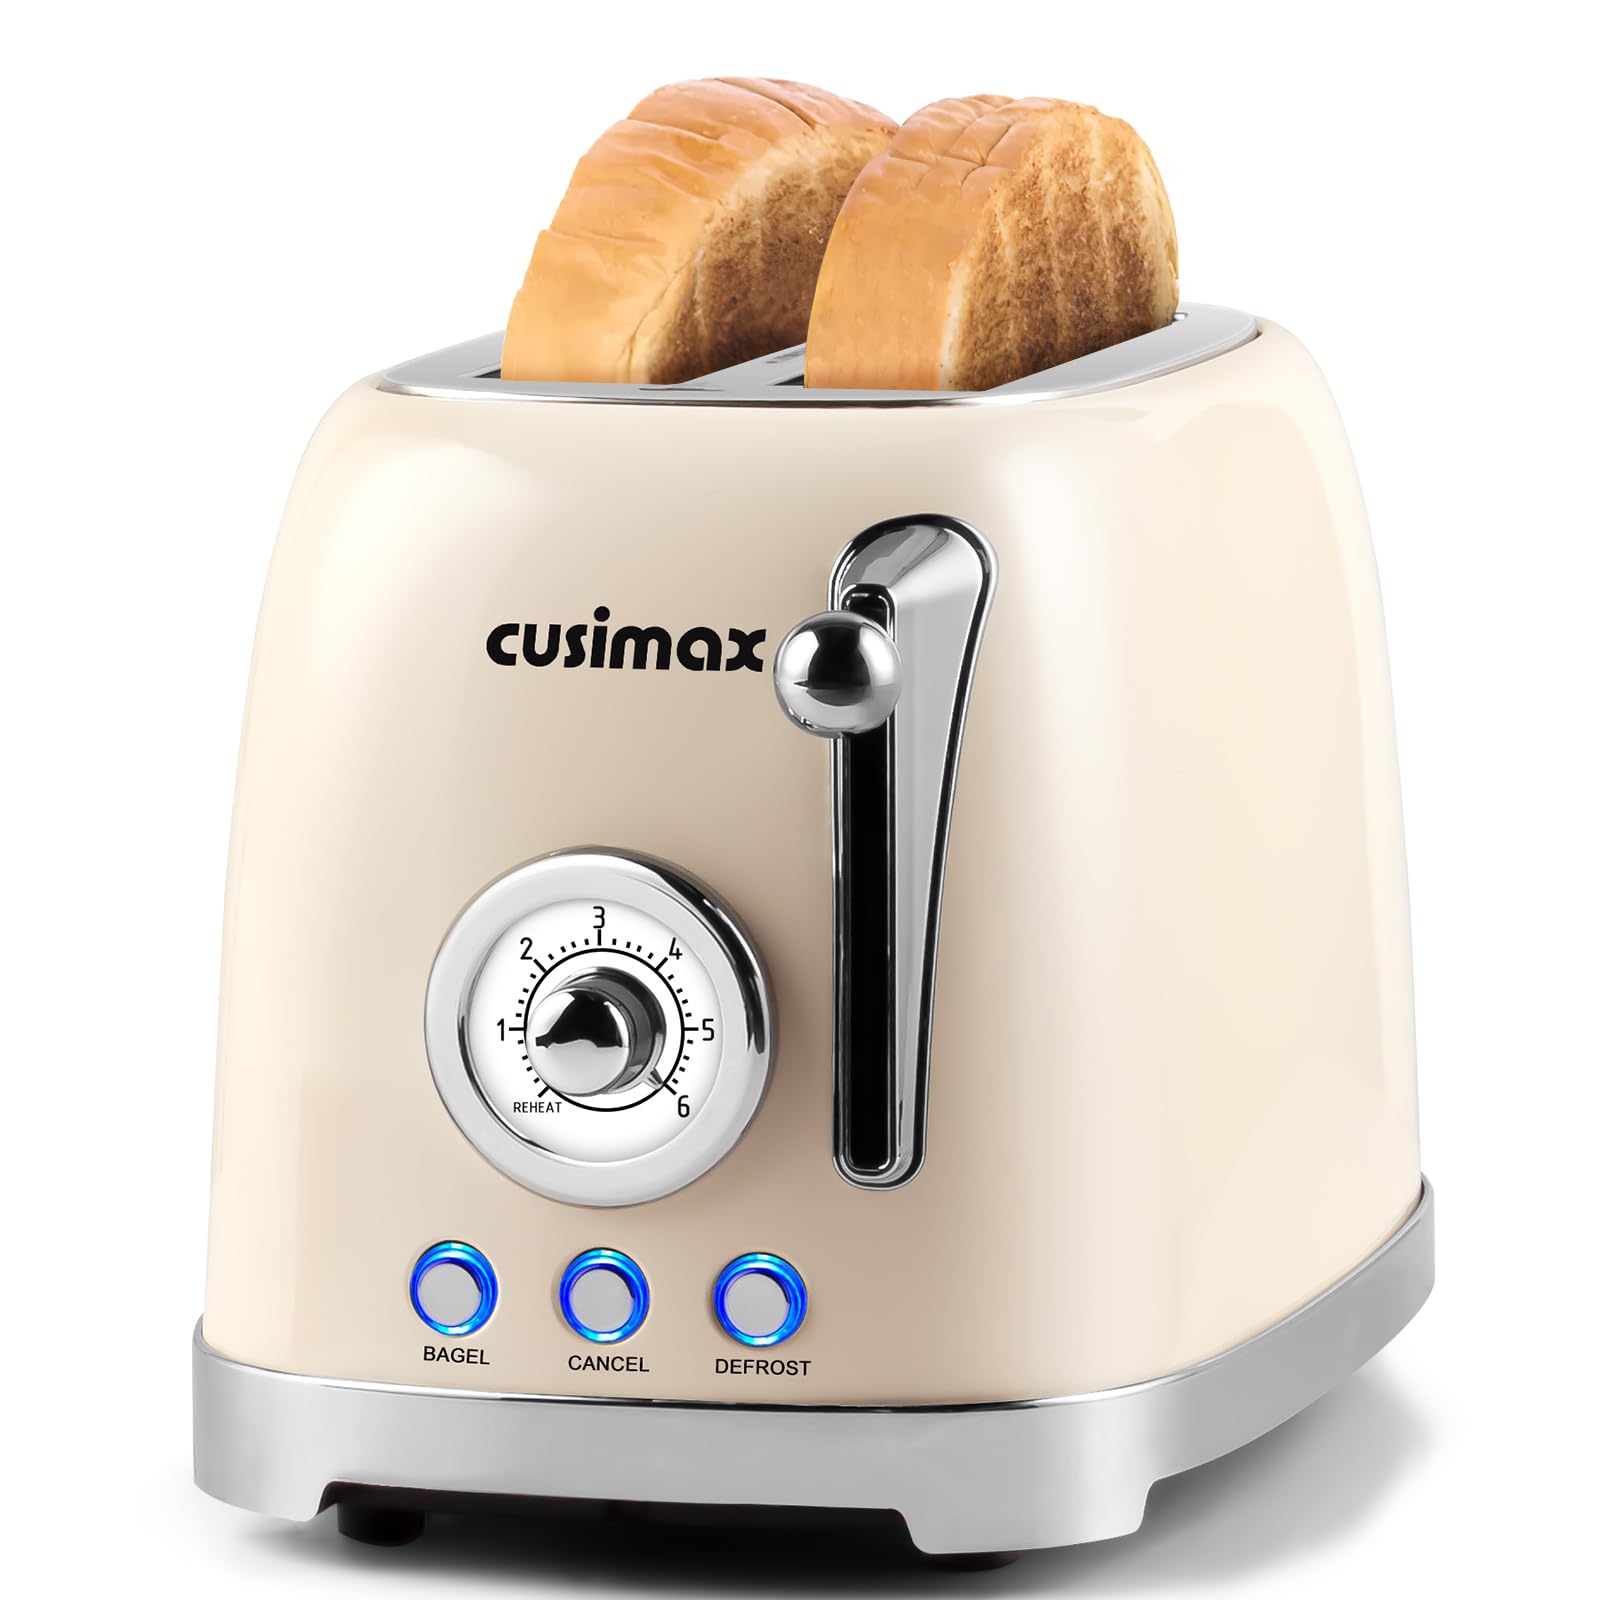 Cusimax Retro Toaster 2 Slice with Extra Wide Slots for Bagels and Waffles, 6 Toast Settings and 4 Functions, Bagel, Cancel, Defrost & Reheat, Removable Crumb Tray